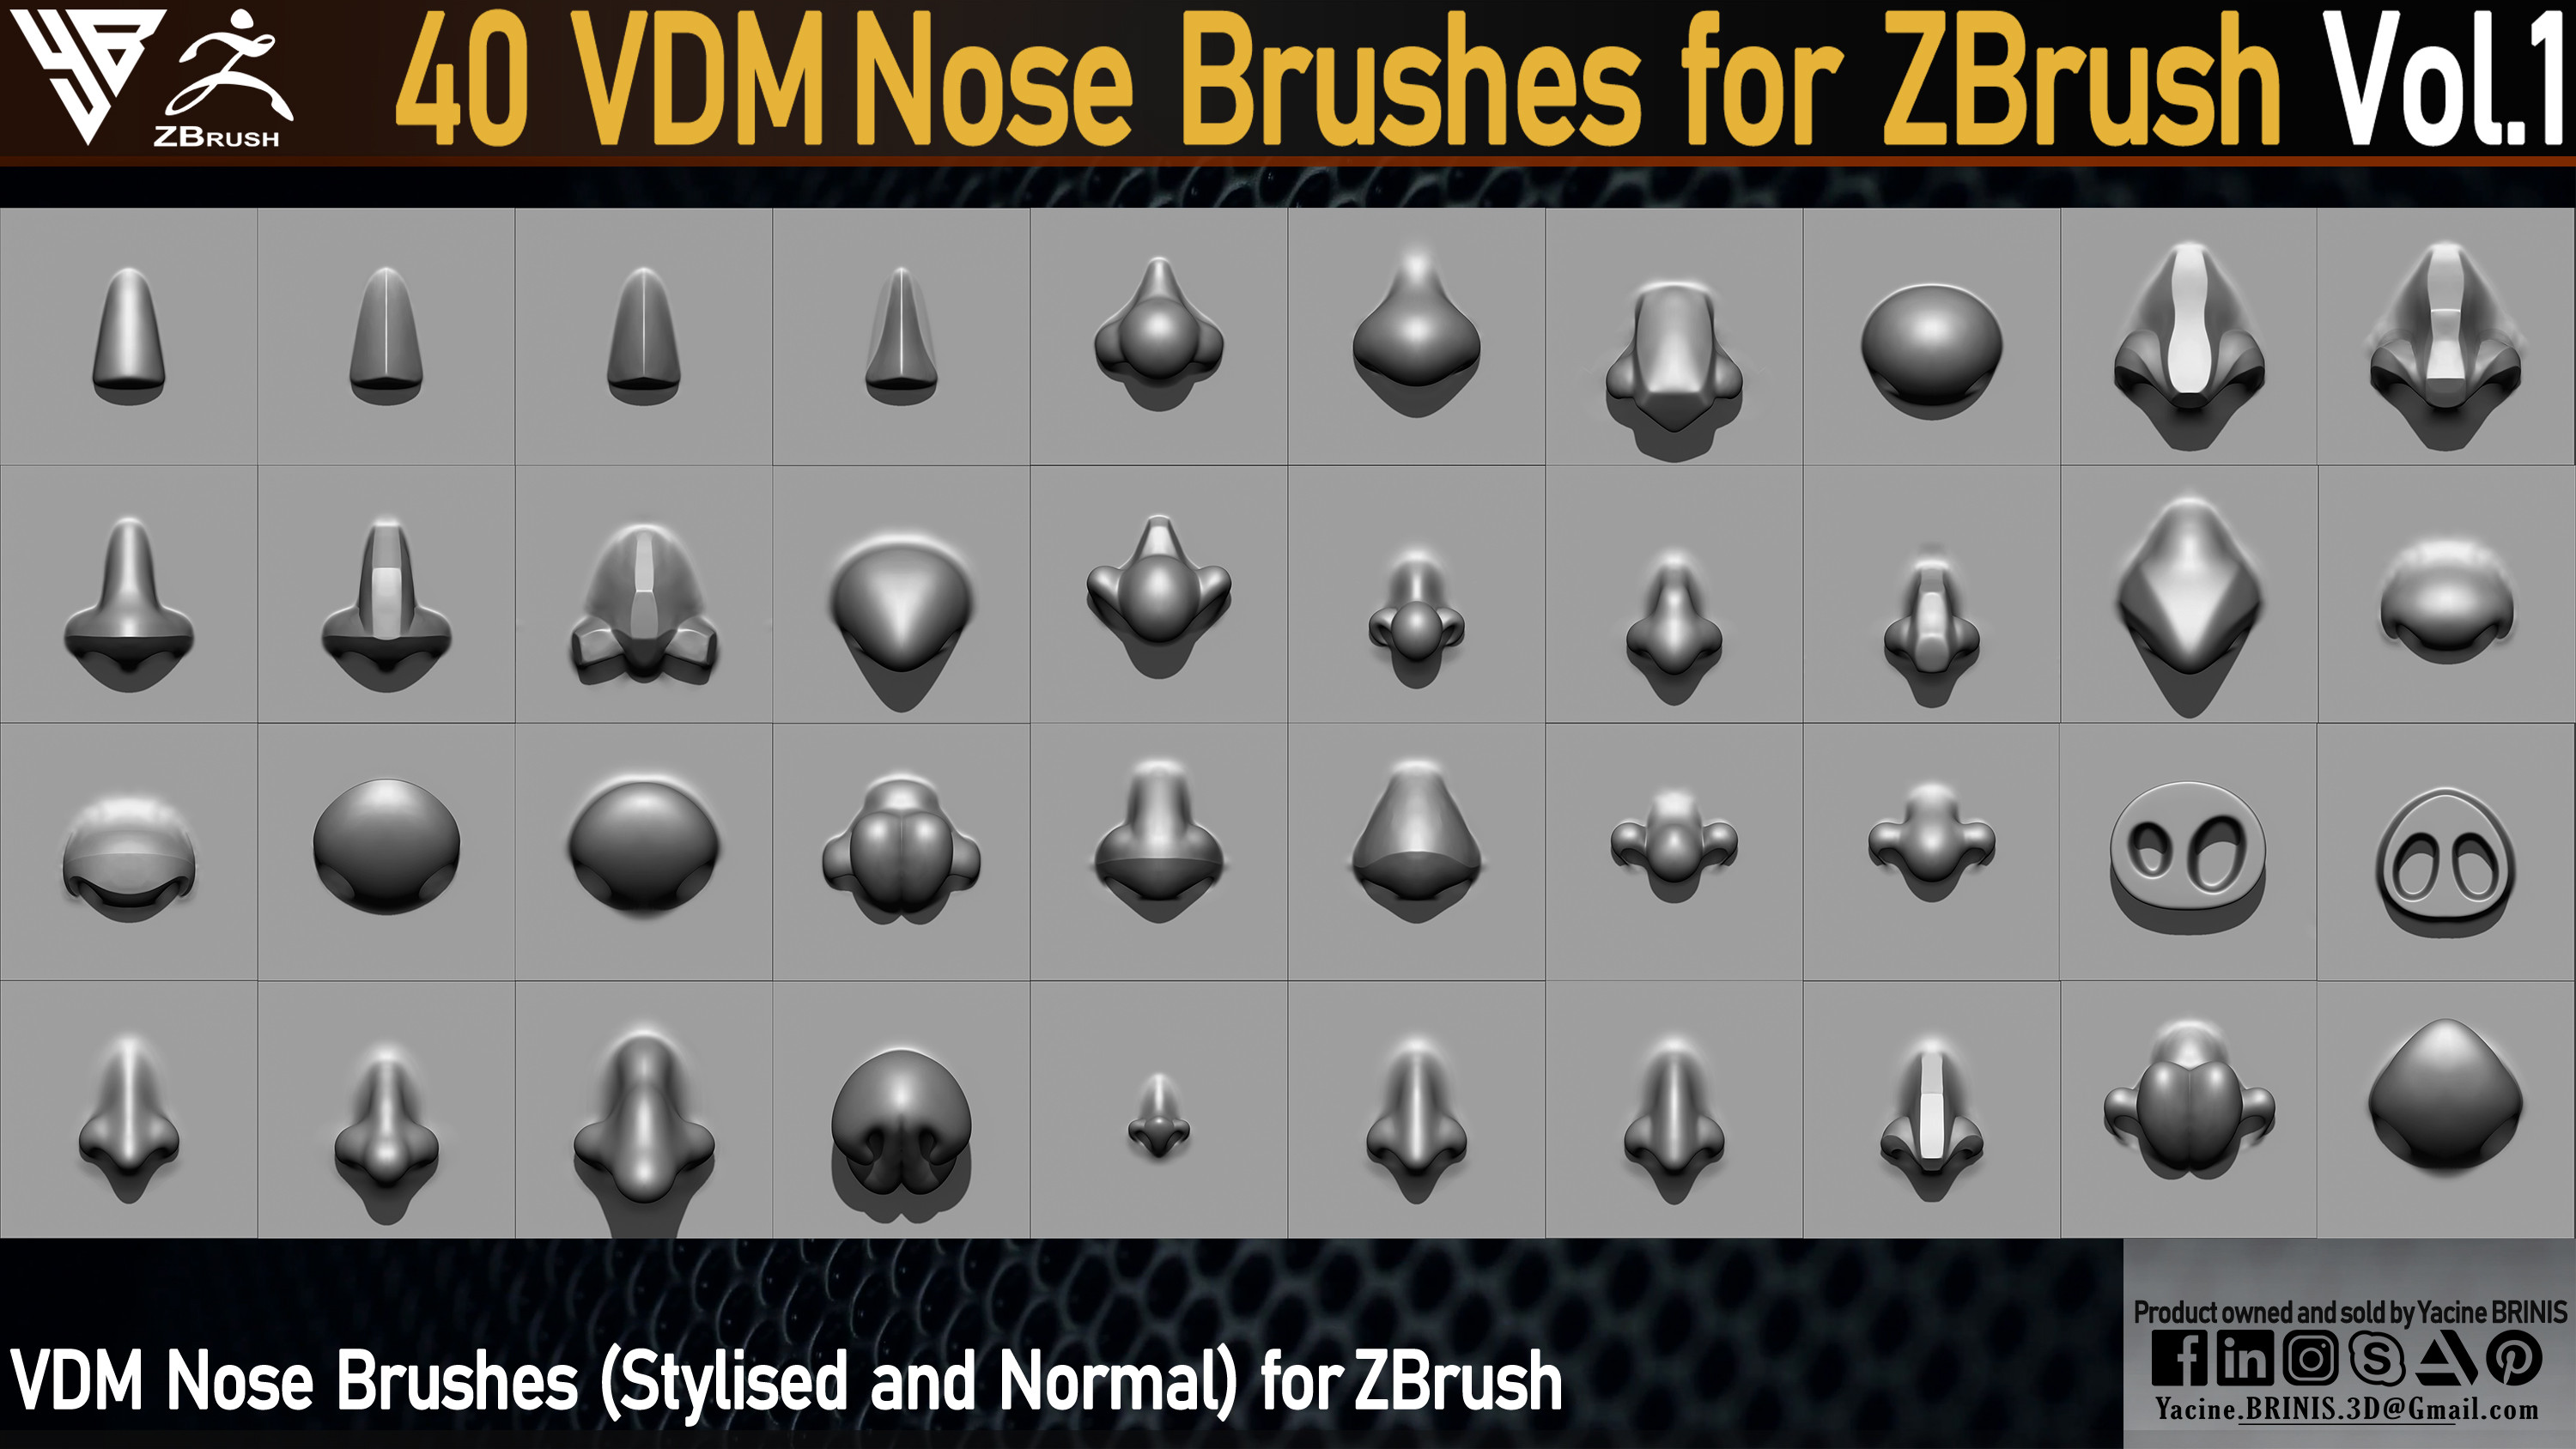 40 VDM Nose Brushes for ZBrush Vol 01 (Stylised and Normal) by Yacine BRINIS Set 02